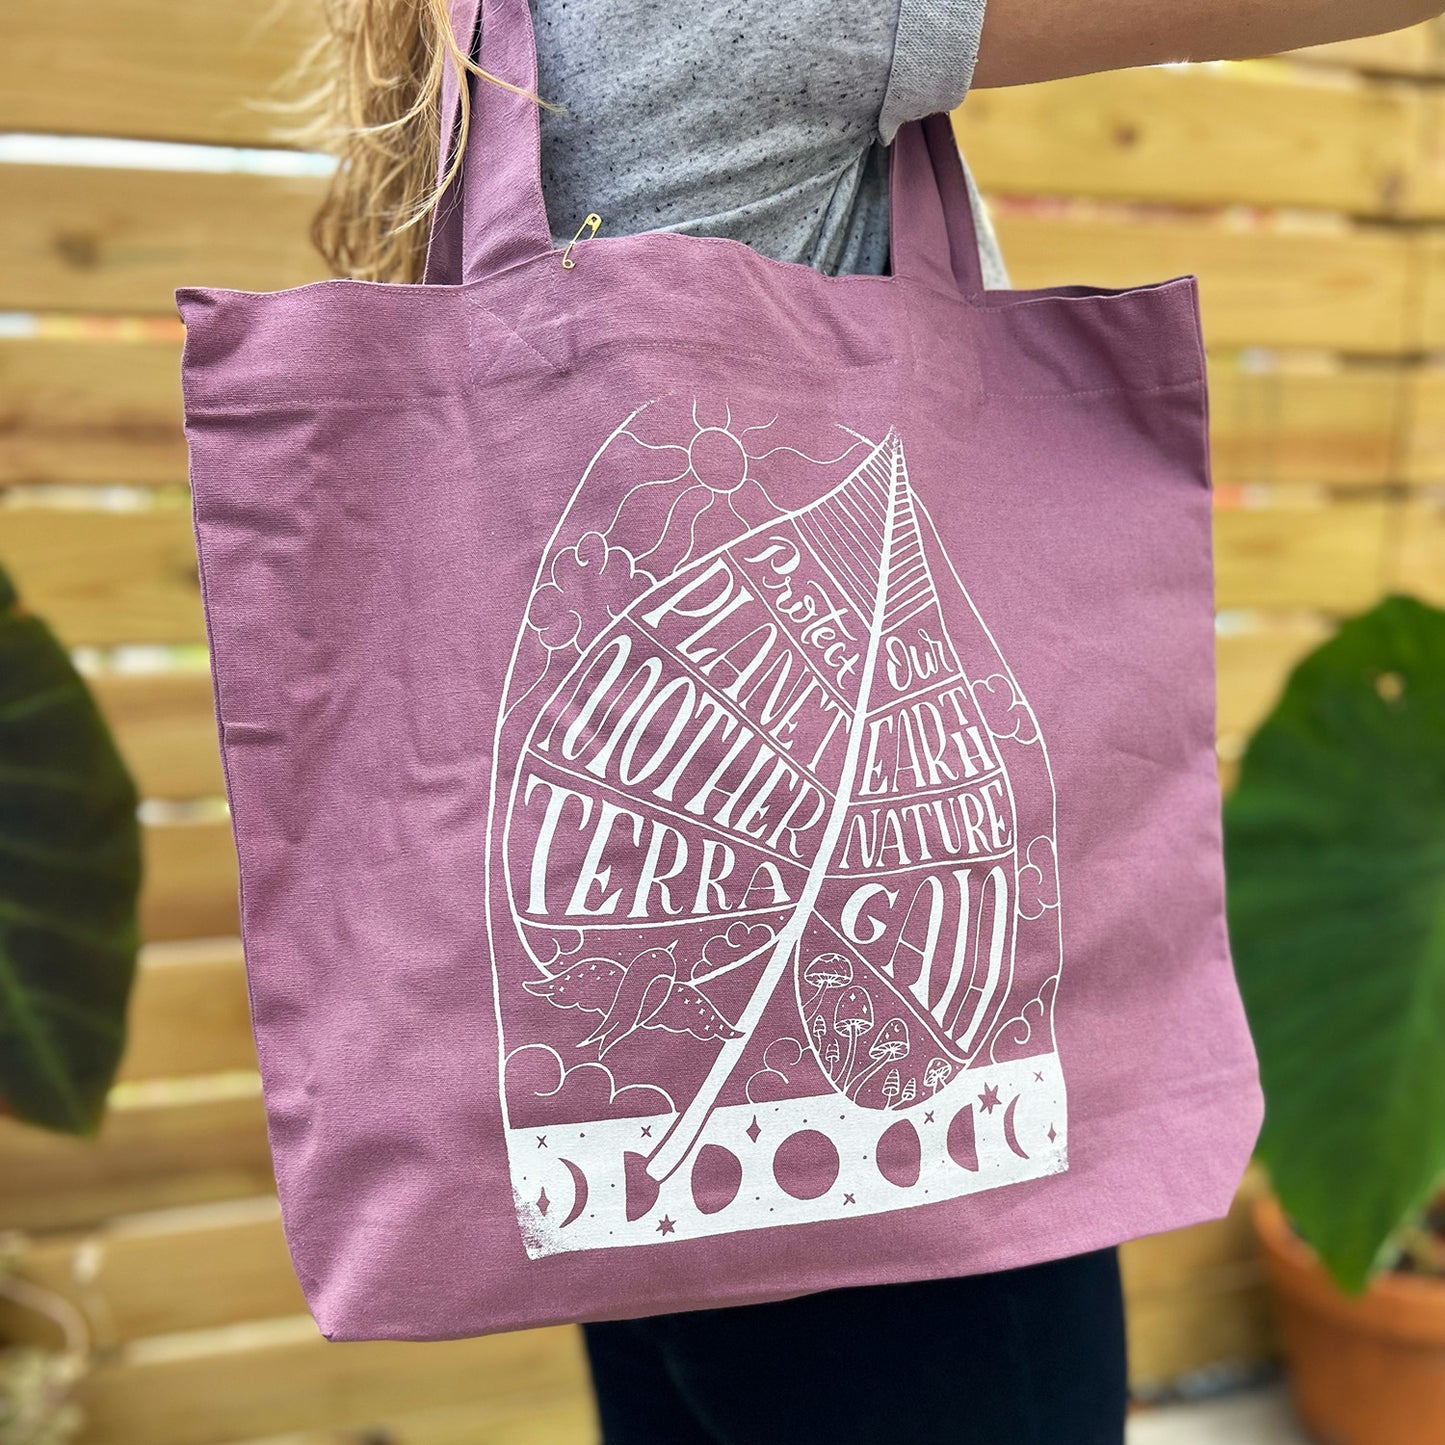 Protect Mother Nature | Purple Tote Bag.